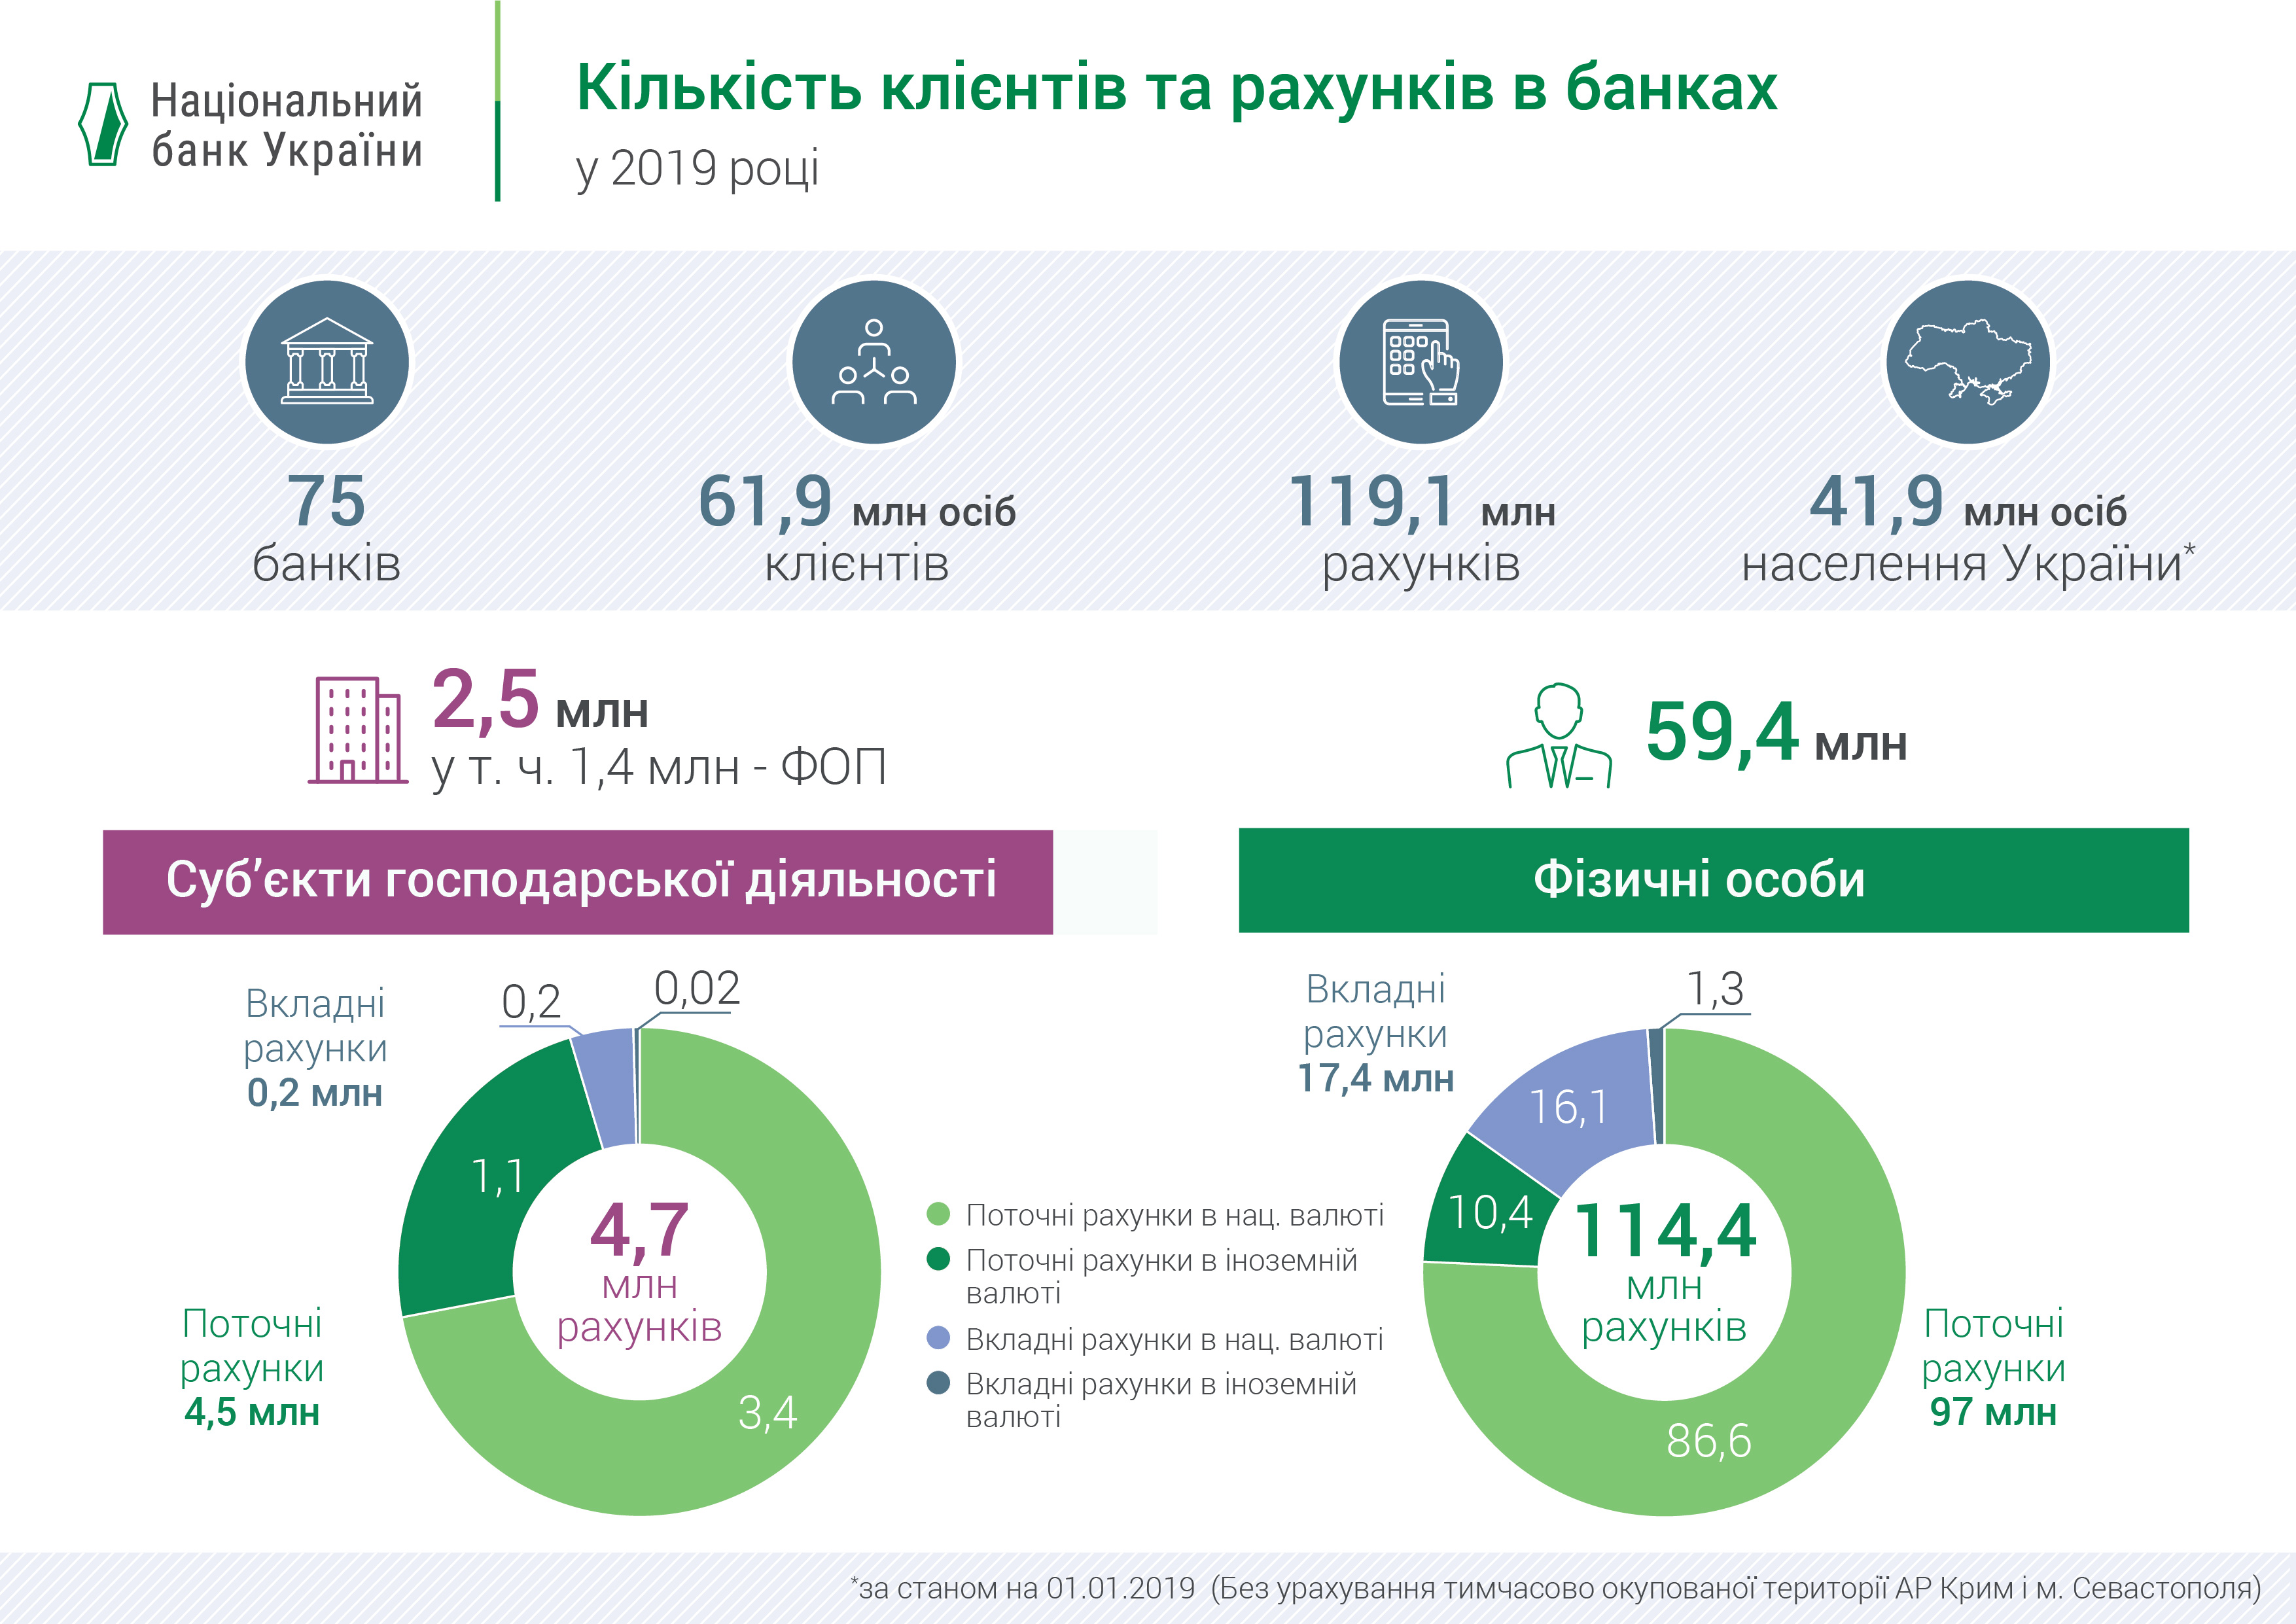 Number of customers and bank accounts, 2019 (UKR)